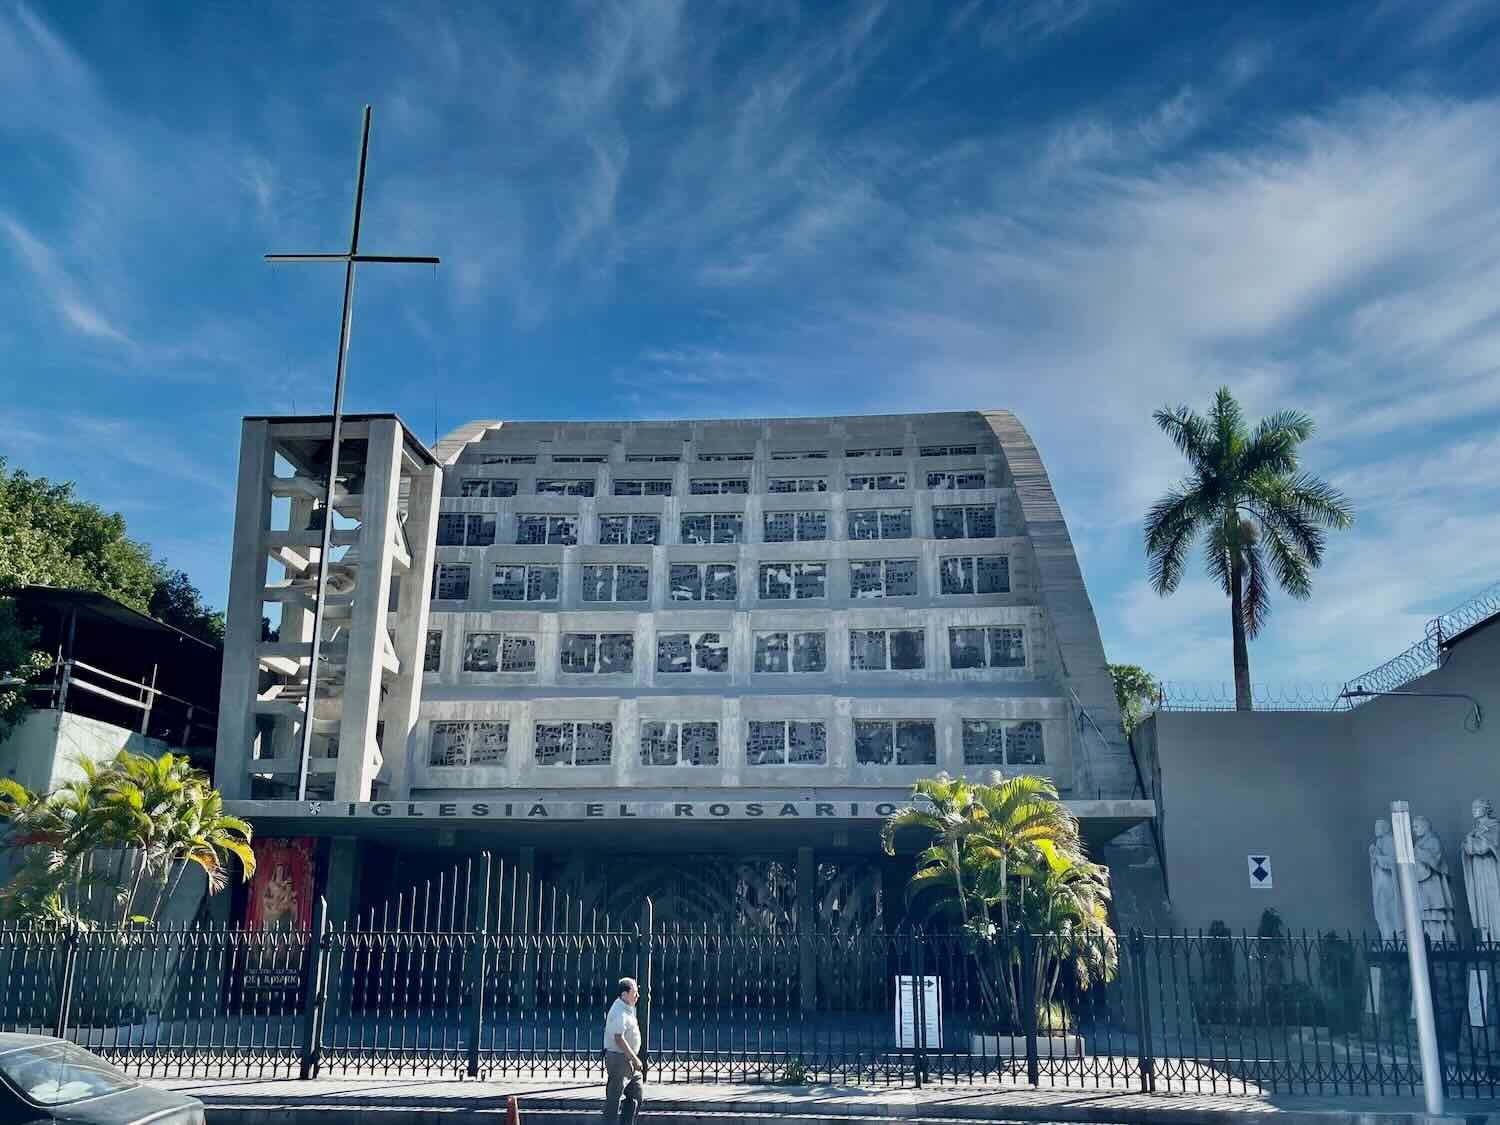 By comparison, the exterior of El Rosario Church seems rather plain, and is dominated by unpainted concrete